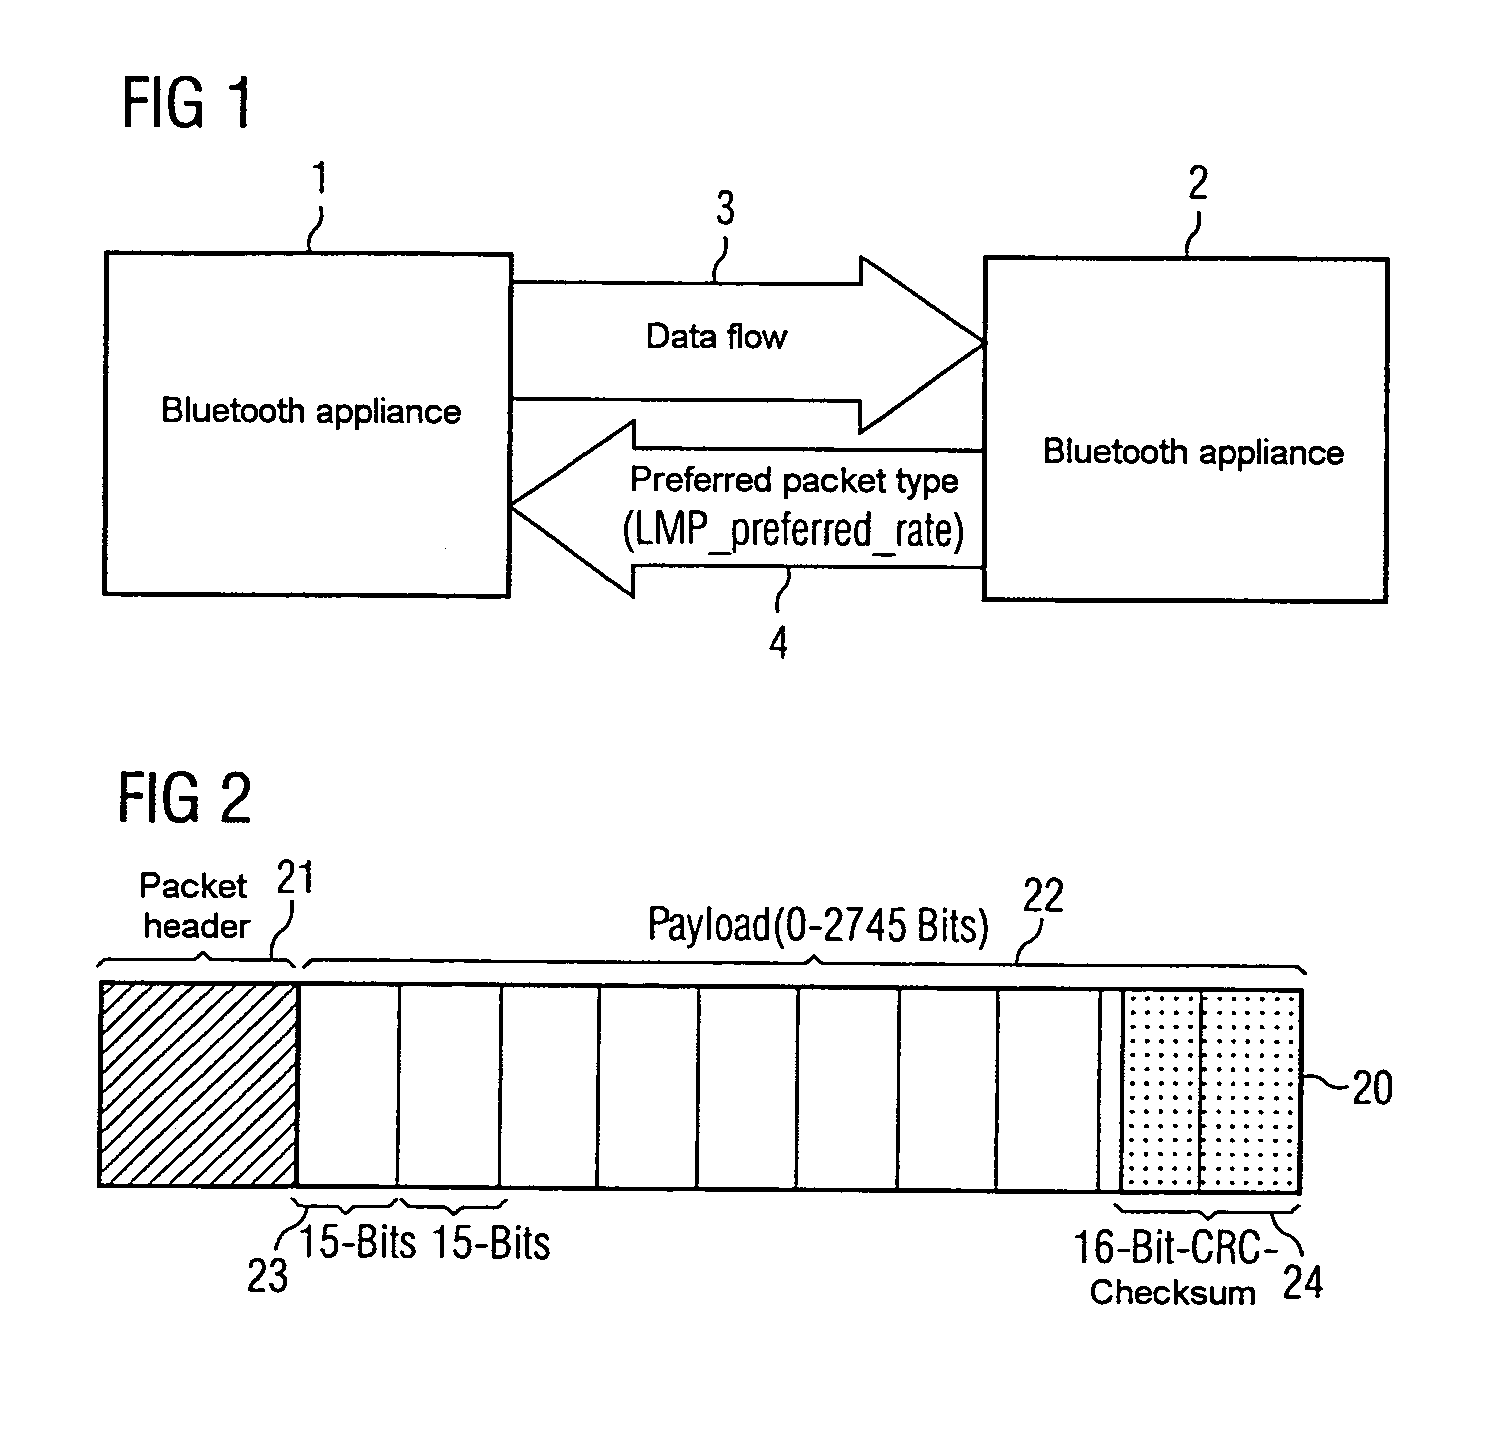 Optimization of the data throughput of a mobile radio connection by efficient packet type changing